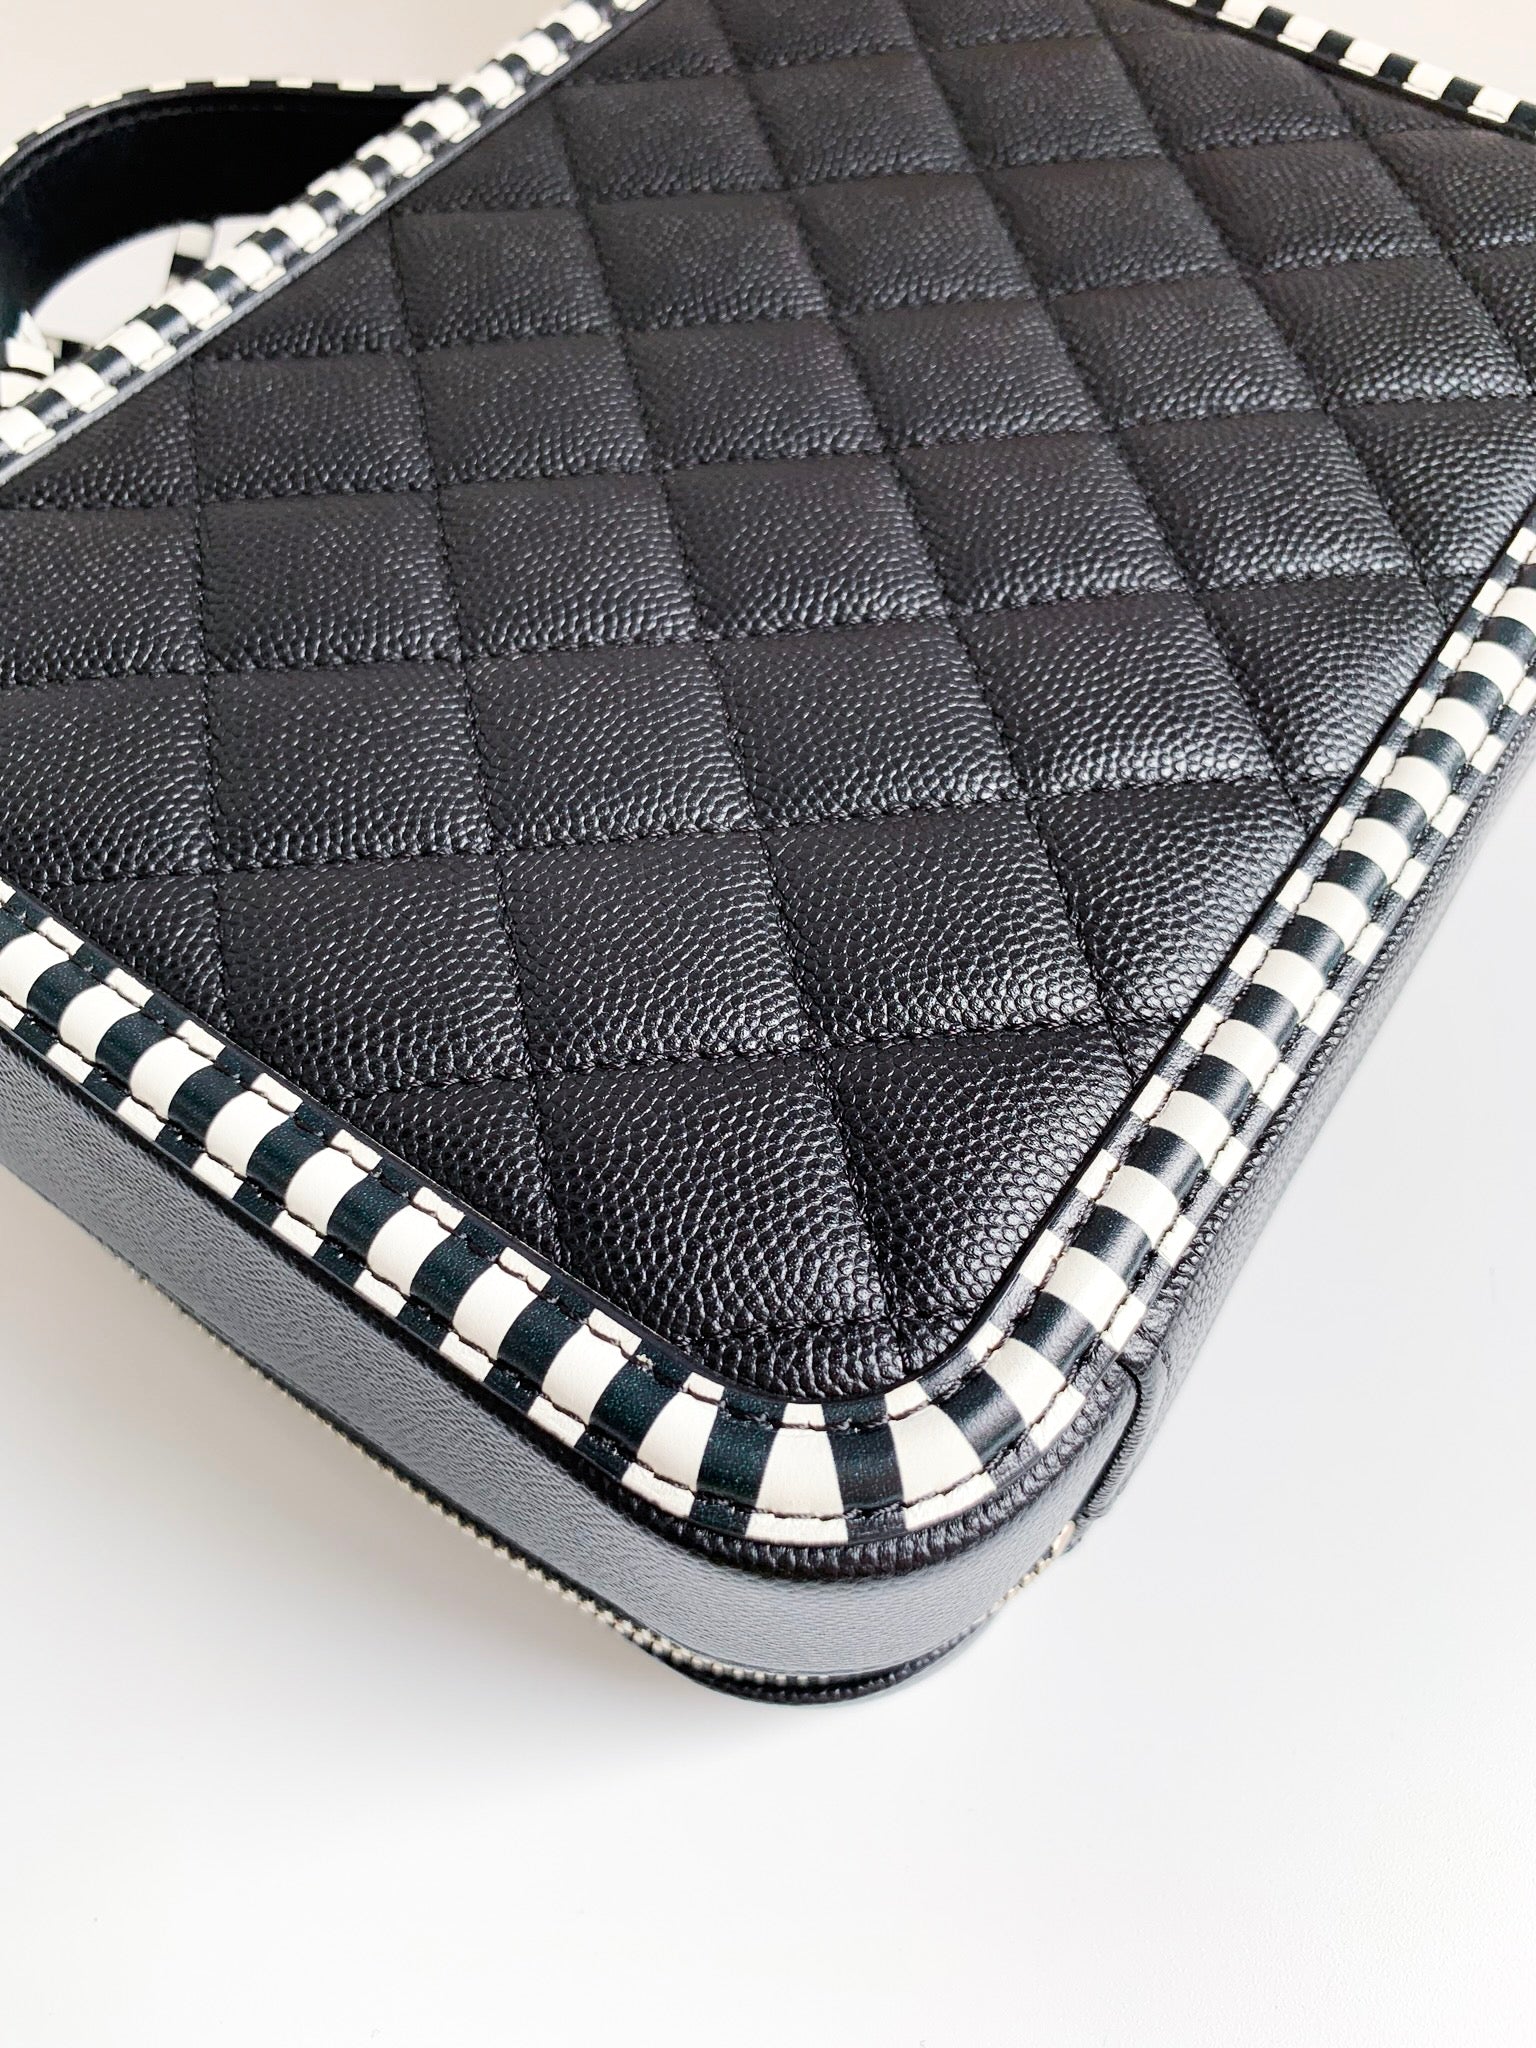 NEW CHANEL Black Caviar Leather Quilted CC Logo iPad Tablet Case Holder  Cover